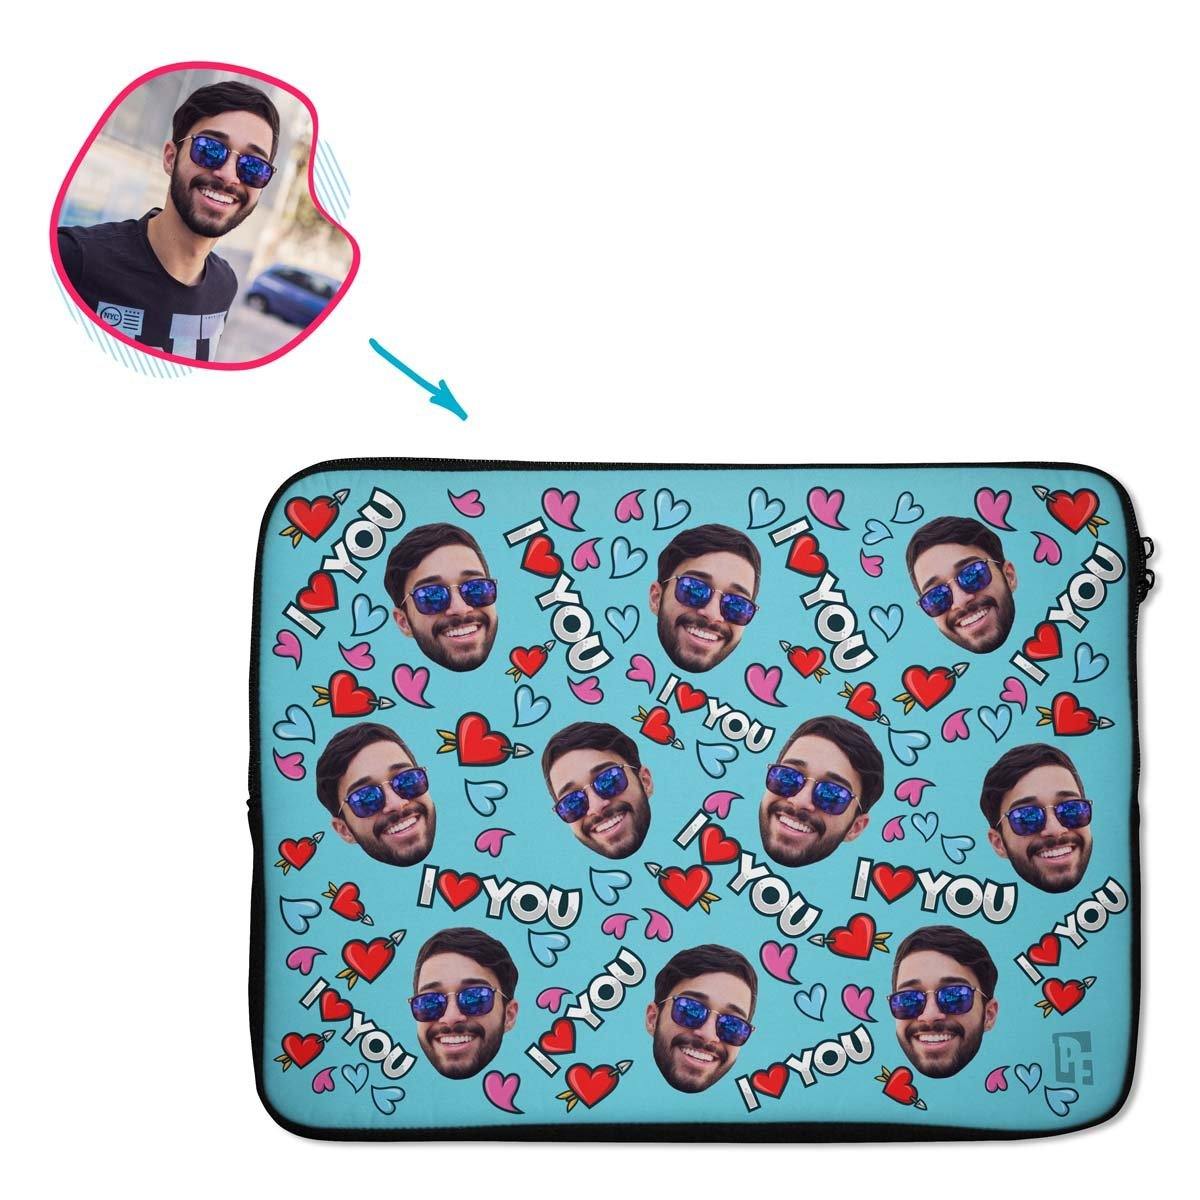 blue Love You laptop sleeve personalized with photo of face printed on them